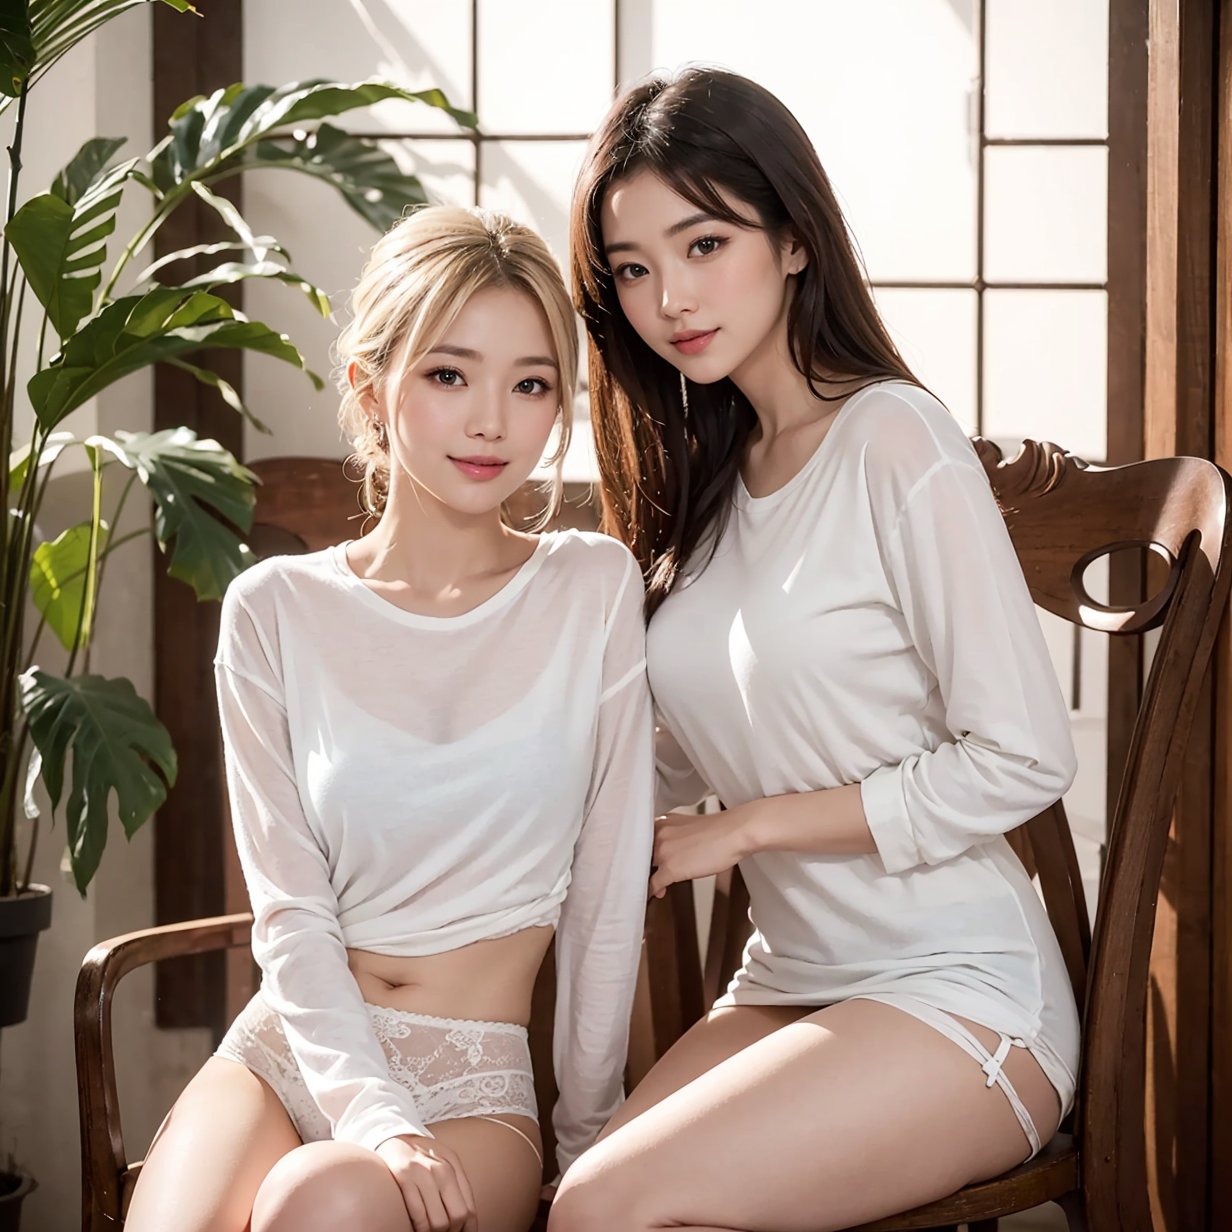 A stunning photorealistic masterpiece of an Asian woman and man in a romantic setting, surrounded by （beachside freshy sunlights )).The woman, with blonde hair and natural skin texture, wears long sleeve white OL shirt,and sexy a white tiny short underwear & short skirts, posing dynamically with a smile, against a dimly lit shaded plaza background.((Night ambient, night  scene, cinematic photorealistic shooting,light and shadow.)),cloceup halfbody photography. sitting on chair, front view. looking at camera.
Her eyes are finely detailed with a hint of blush, as she looks directly leftside of the viewer. The scene is captured in breathtaking 8K detail, with film grain and a shallow depth of field, showcasing the beauty of their natural skin texture and the intricate flower arrangement.
